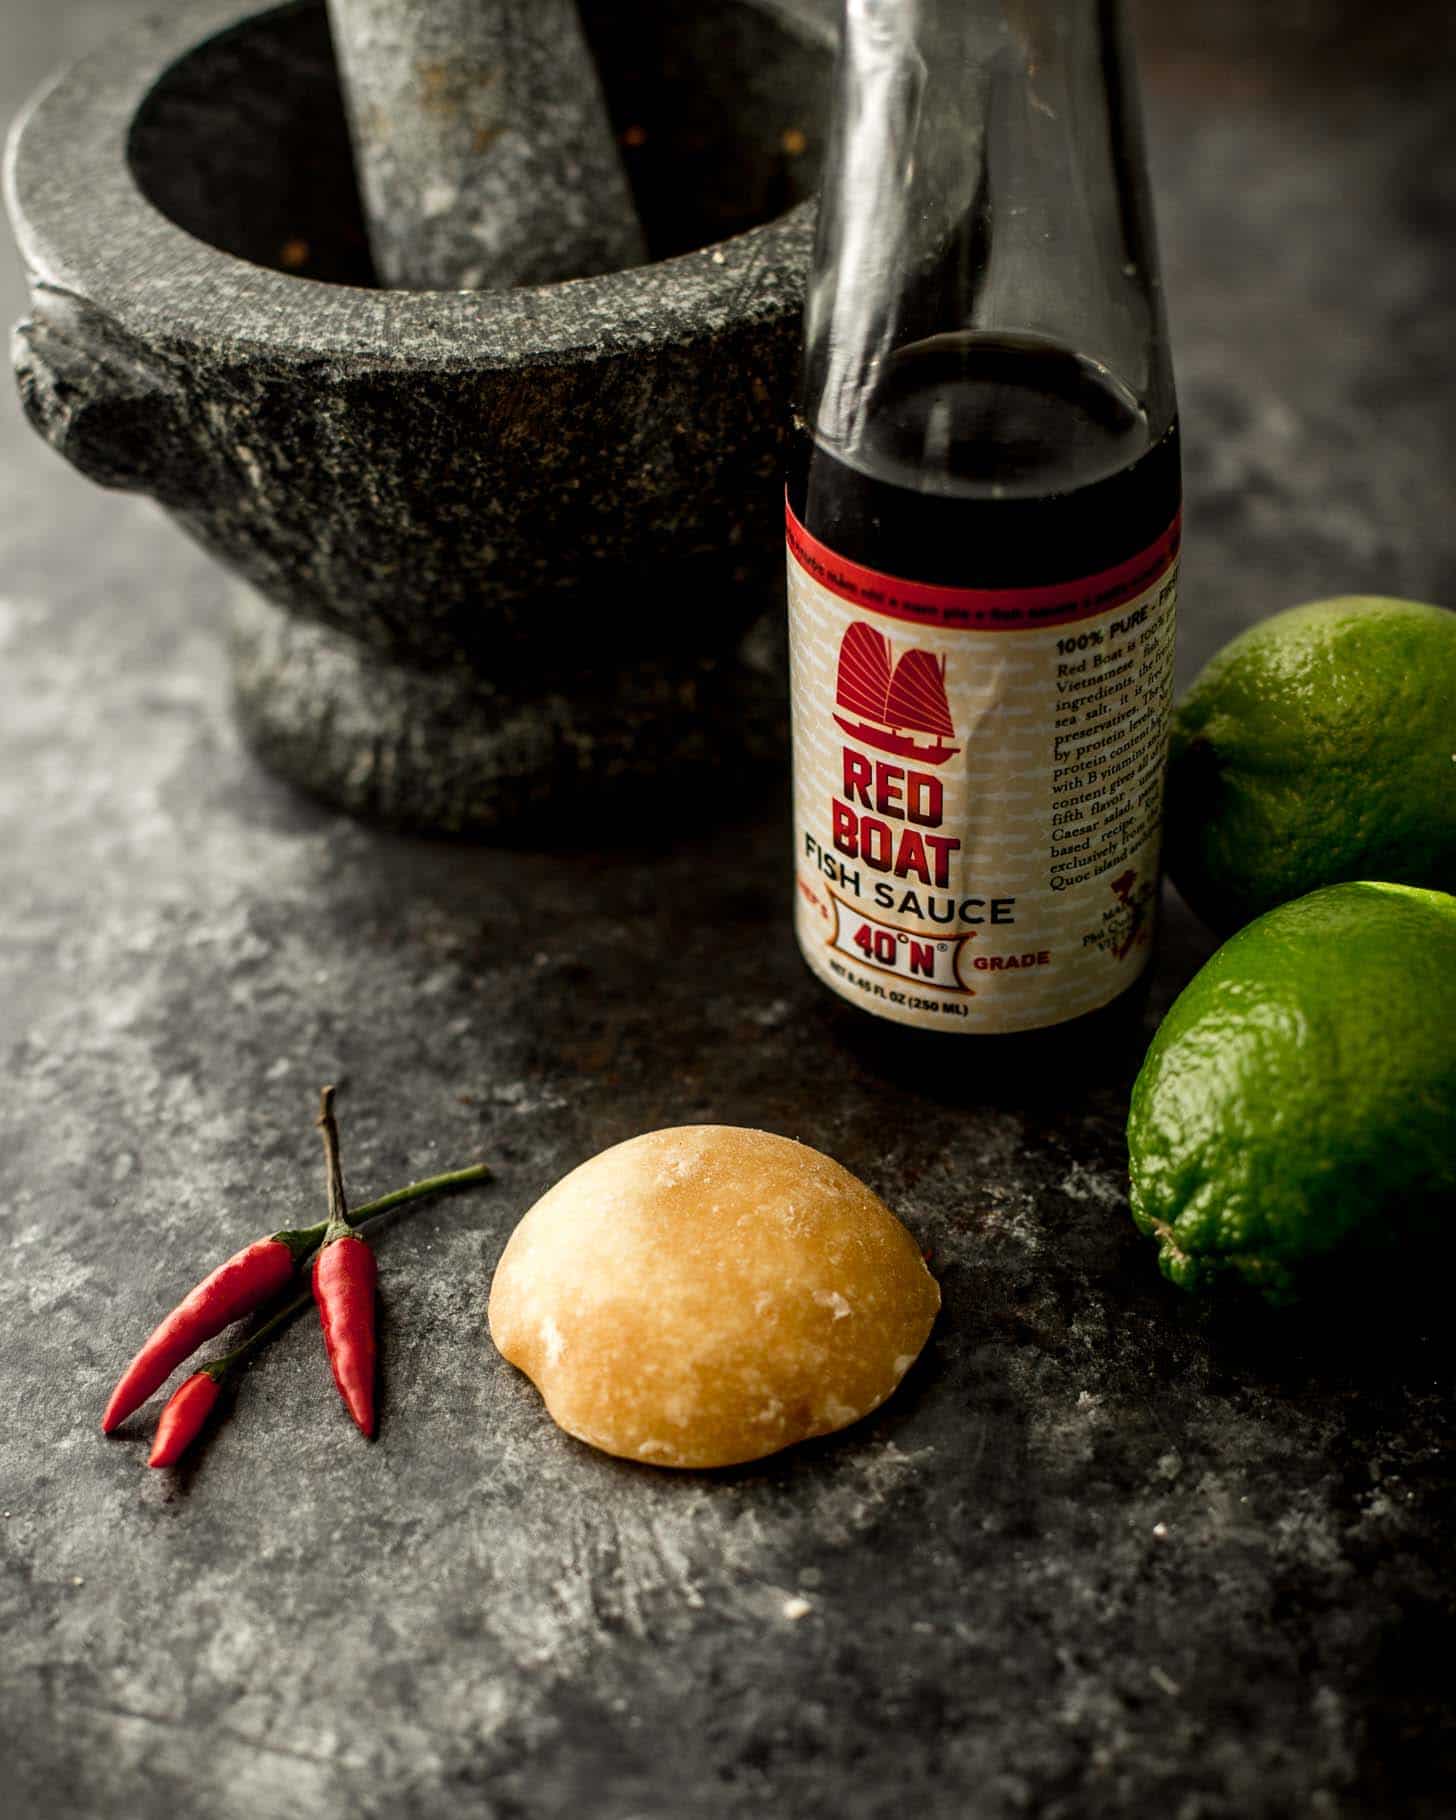 cane sugar, fish sauce, red peppers, limes on a grey countertop